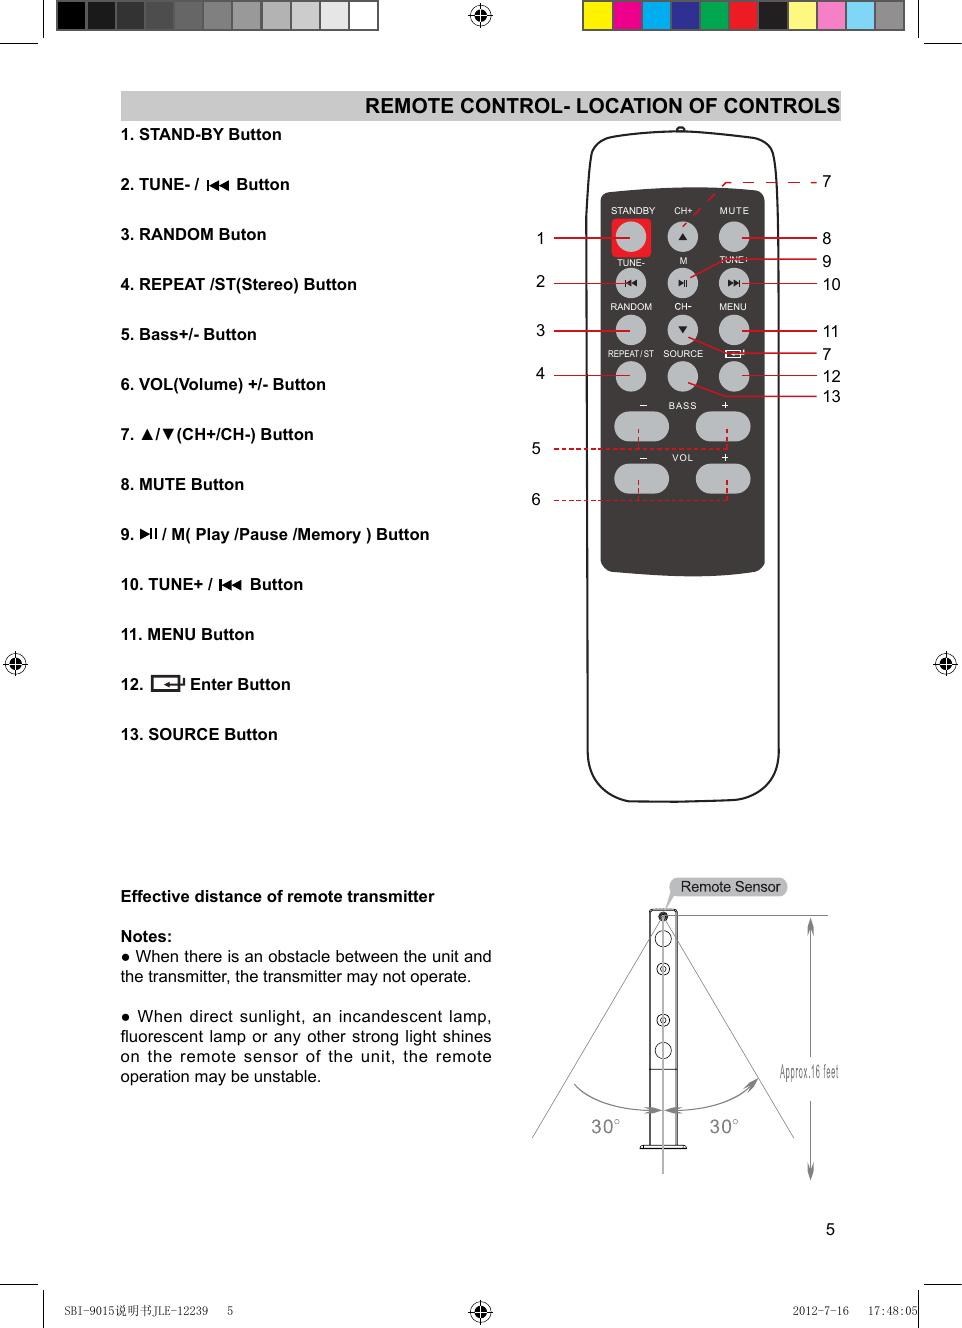 5REMOTE CONTROL- LOCATION OF CONTROLS1. STAND-BY Button2. TUNE- /        Button3. RANDOM Buton4. REPEAT /ST(Stereo) Button5. Bass+/- Button6. VOL(Volume) +/- Button7. ▲/▼(CH+/CH-) Button8. MUTE Button9.      / M( Play /Pause /Memory ) Button10. TUNE+ /        Button11. MENU Button12.          Enter Button13. SOURCE ButtonEffective distance of remote transmitter Notes:● When there is an obstacle between the unit and the transmitter, the transmitter may not operate.● When direct sunlight, an incandescent lamp, uorescent lamp  or any  other strong light shines on the remote sensor of the unit, the remote operation may be unstable.MUTERANDOMREPEAT /STSOURCEBASSVOLMENUCH+MTUNE- TUNE+127789101112133456STANDBYSBI-9015说明书JLE-12239   5 2012-7-16   17:48:05